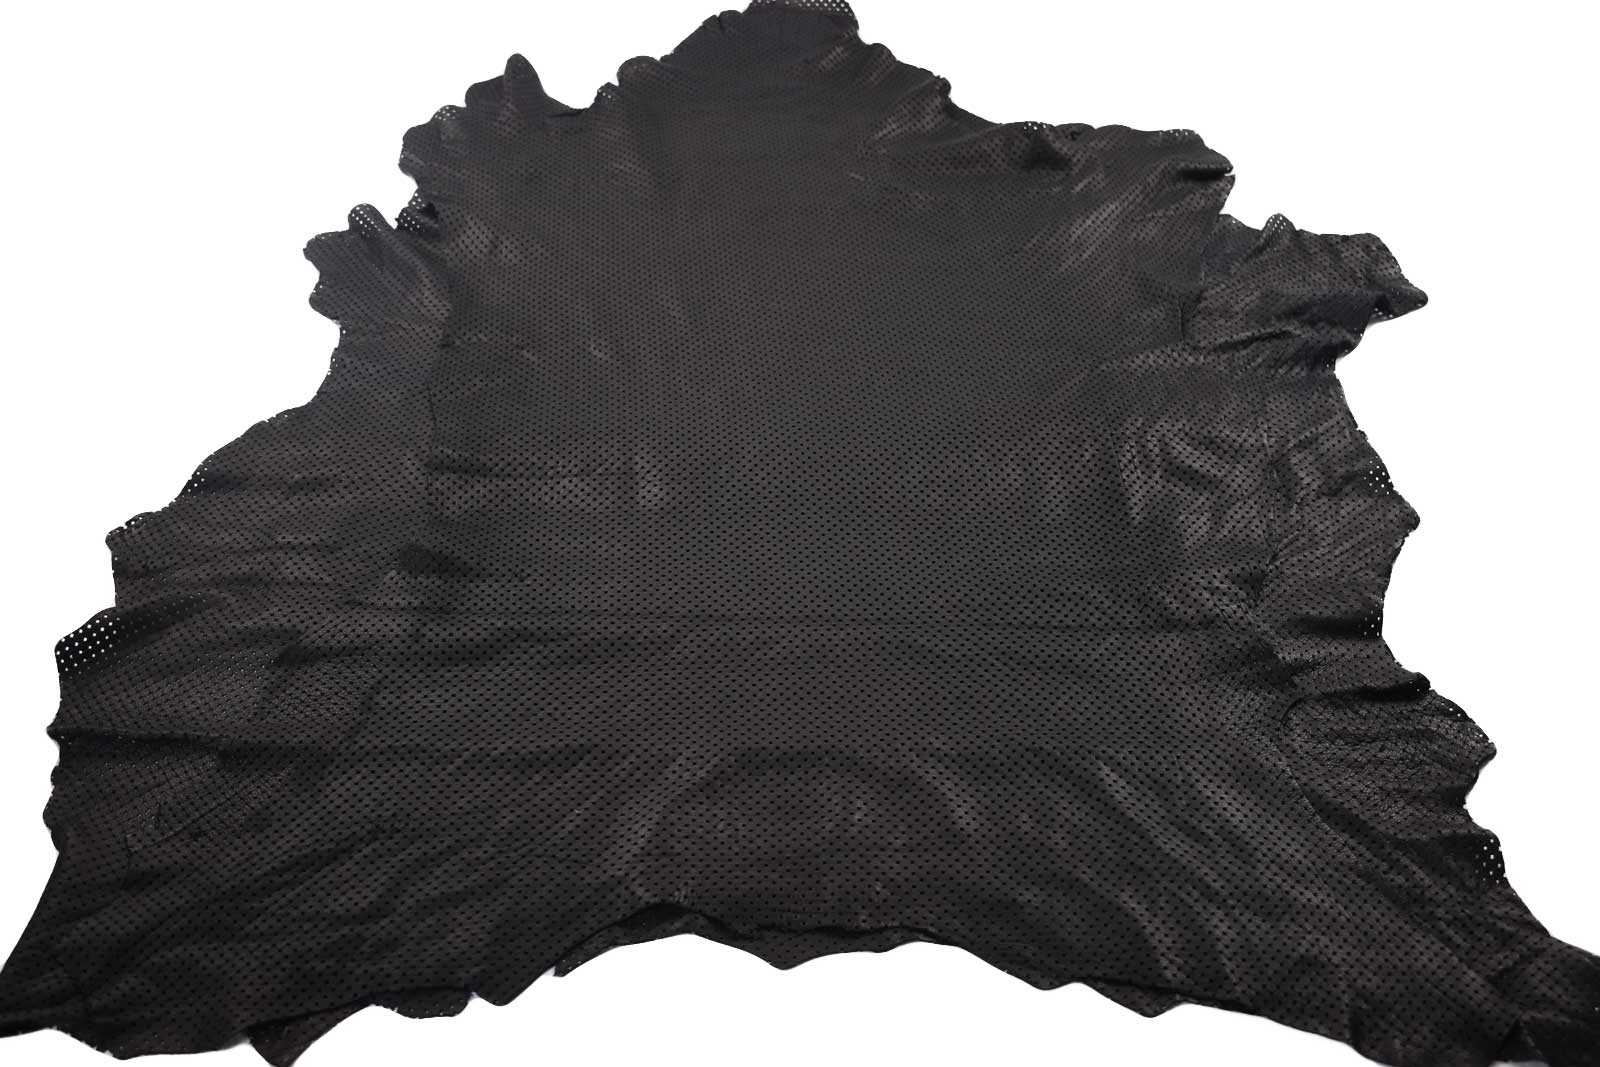 Soft Black perforated sheepskin Leather Stock Lots 14 sq ft